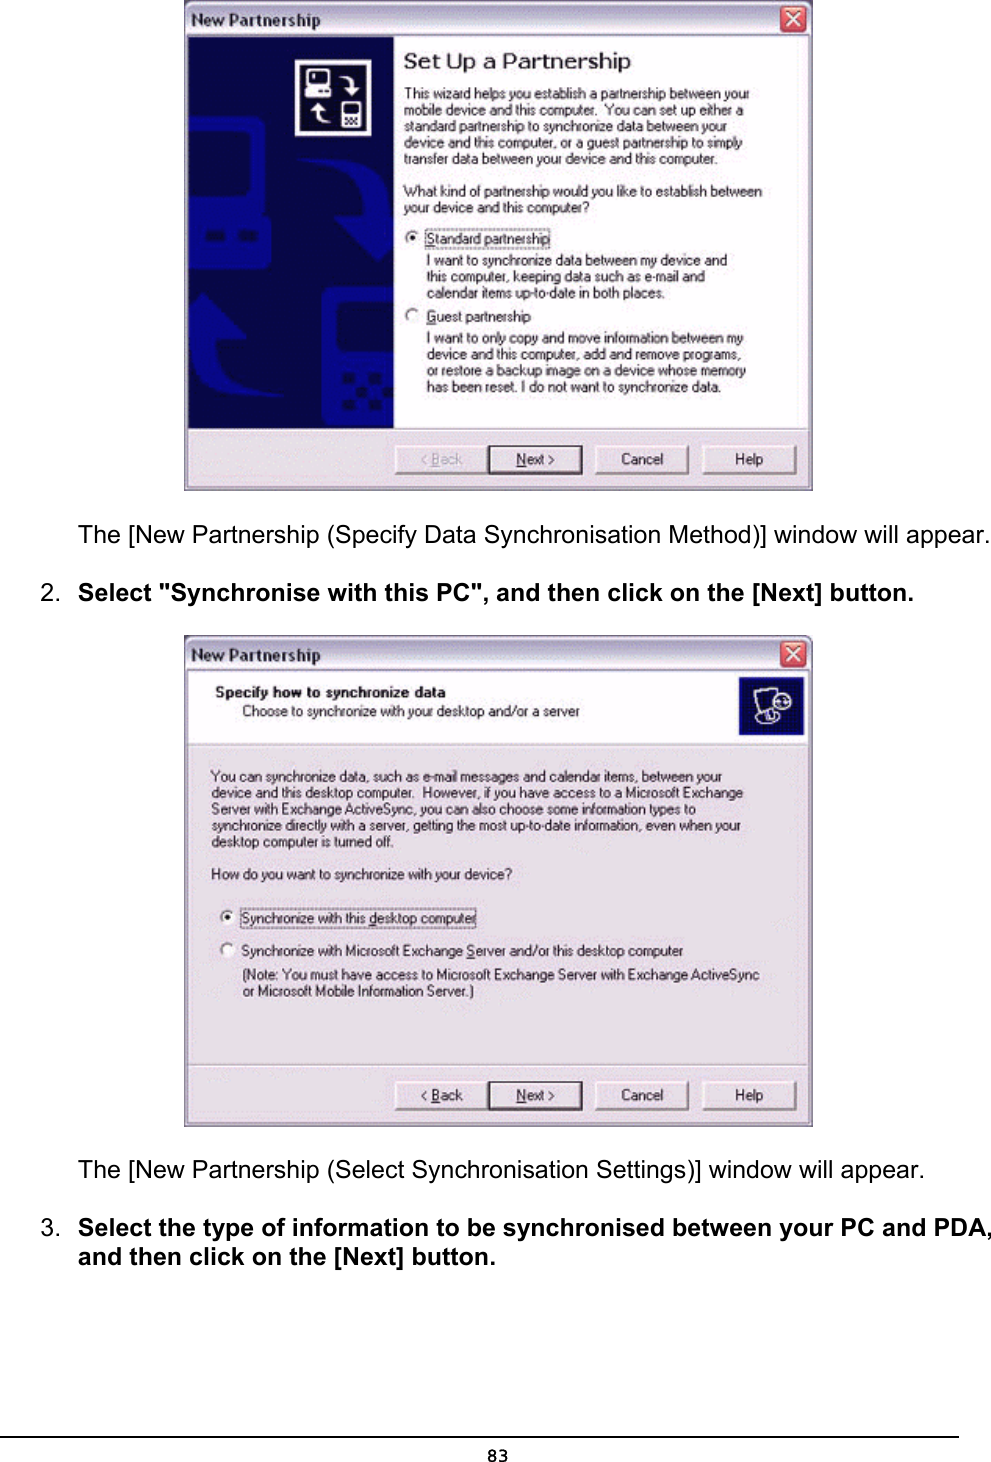   The [New Partnership (Specify Data Synchronisation Method)] window will appear. 2.  Select &quot;Synchronise with this PC&quot;, and then click on the [Next] button.  The [New Partnership (Select Synchronisation Settings)] window will appear. 3.  Select the type of information to be synchronised between your PC and PDA, and then click on the [Next] button.  83